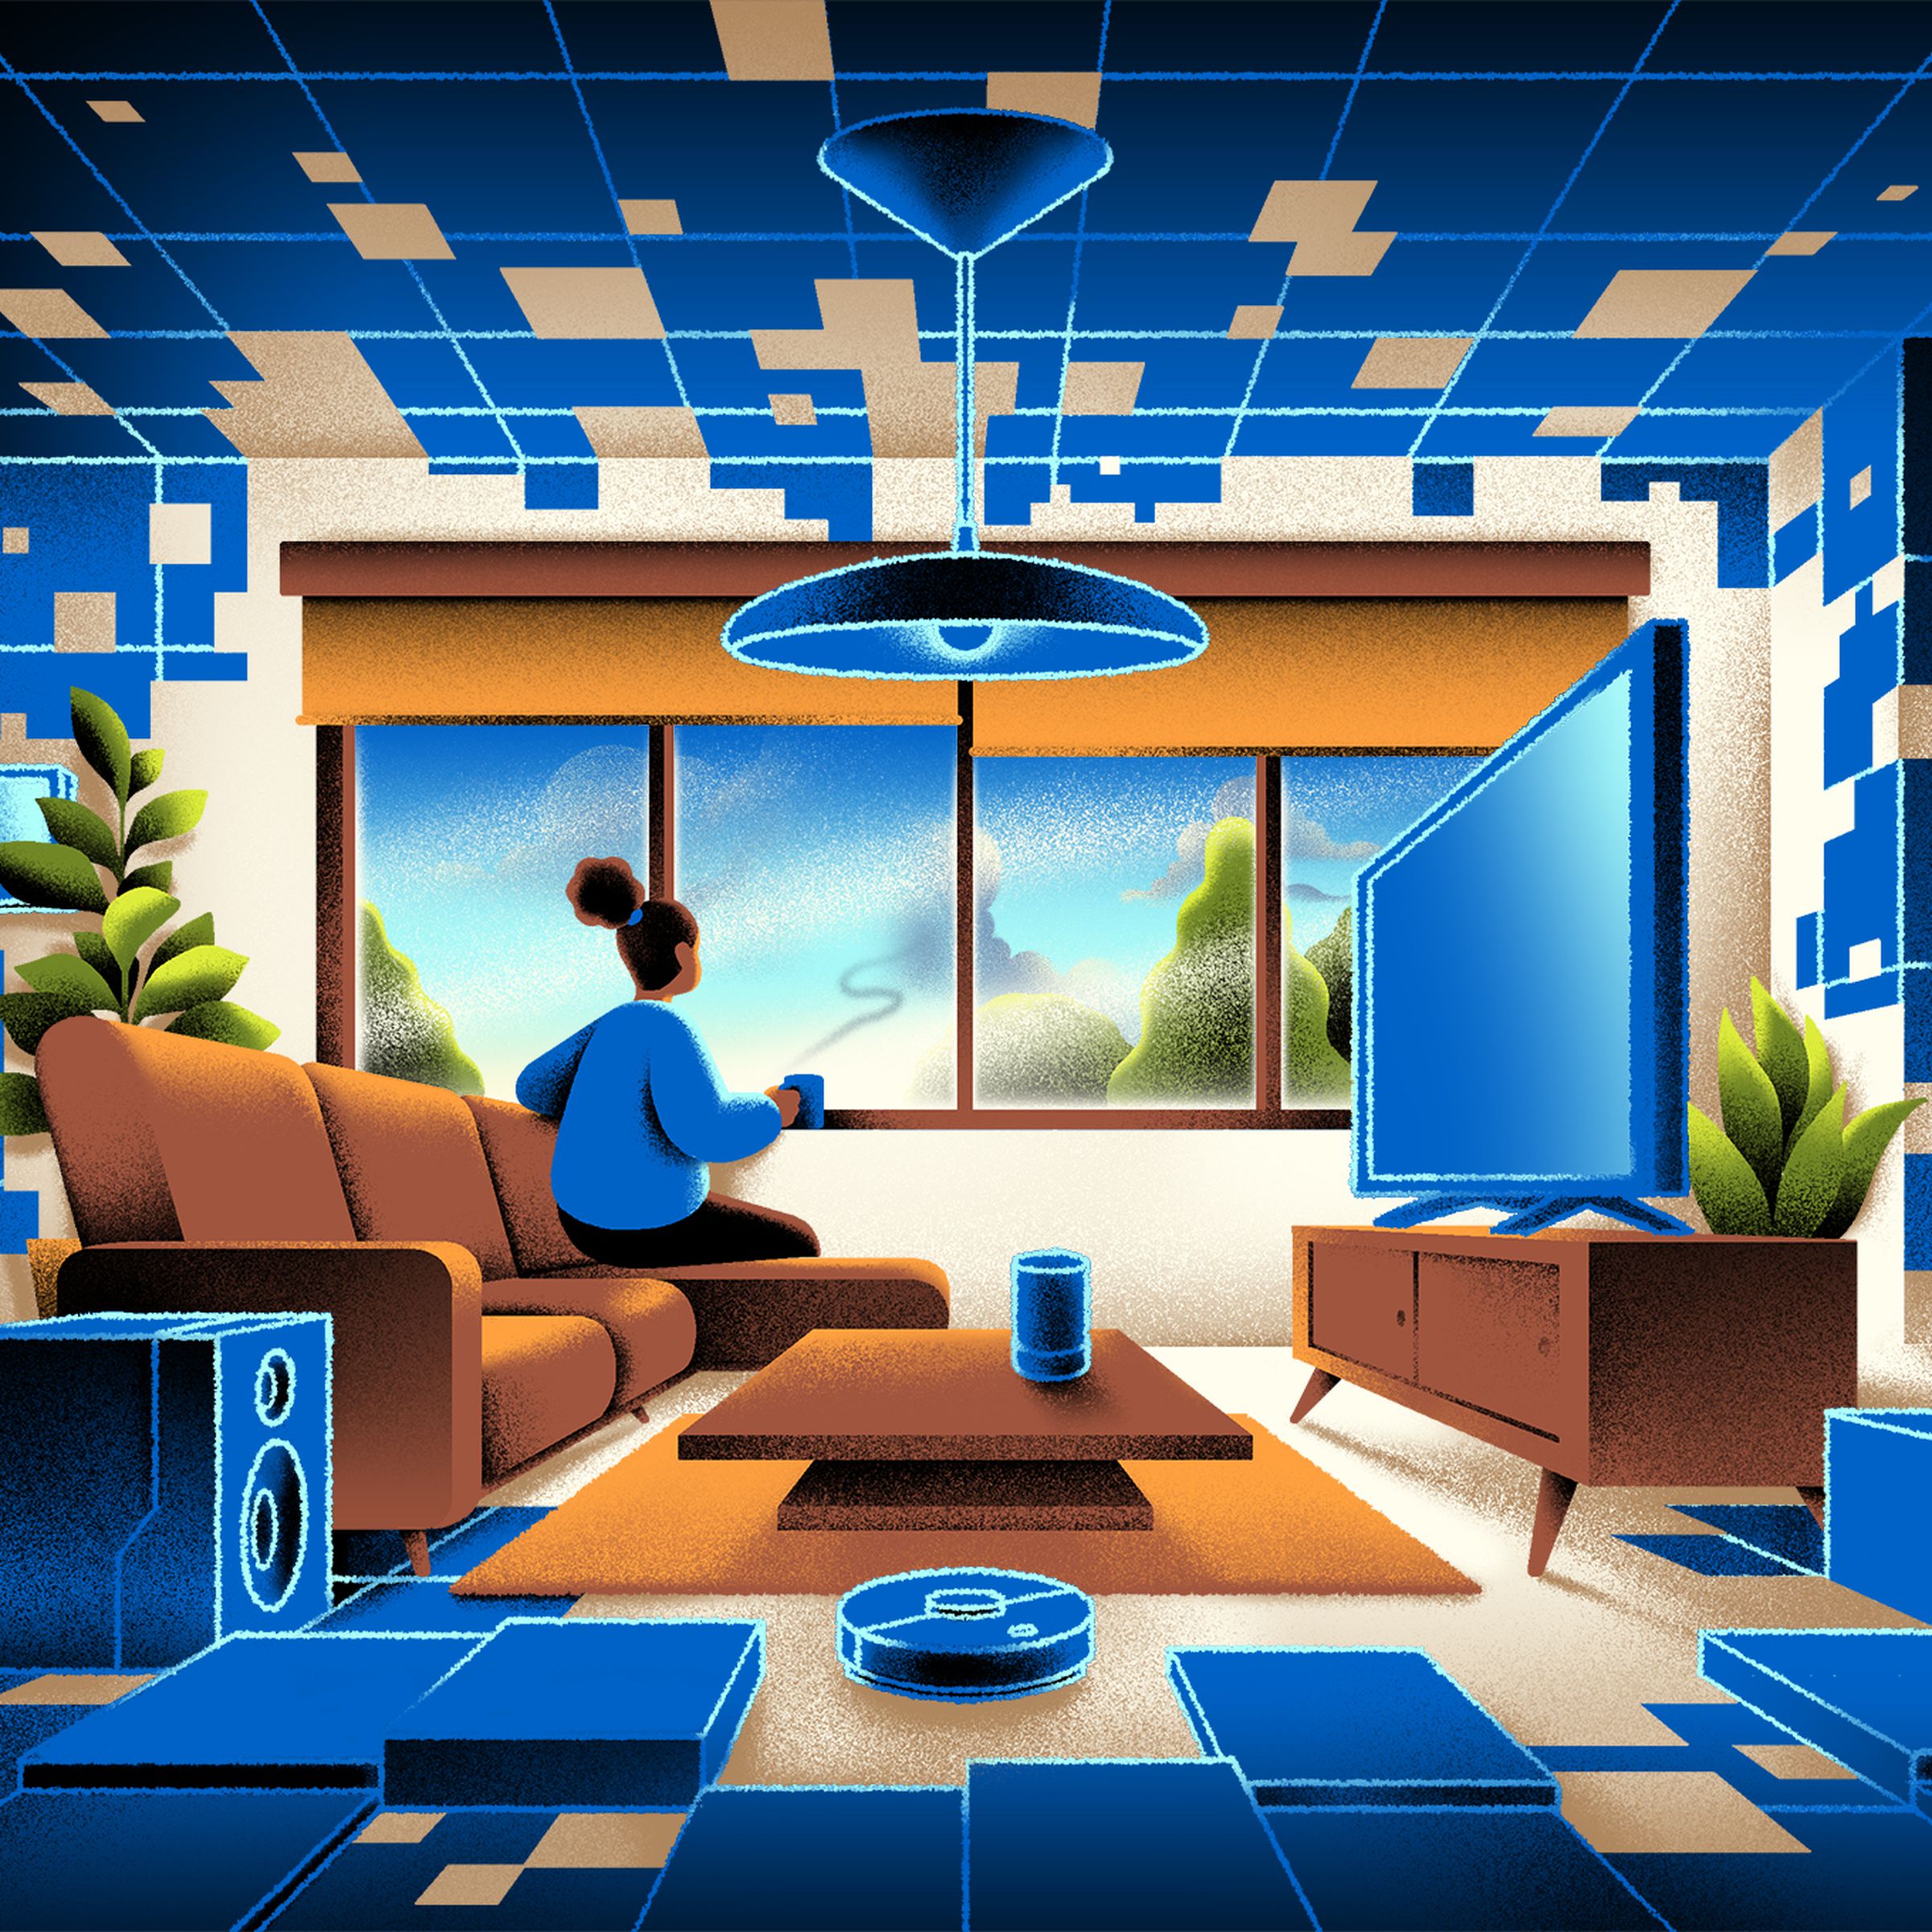 Illustration of a person sitting comfortably in a house filled with smart tech.